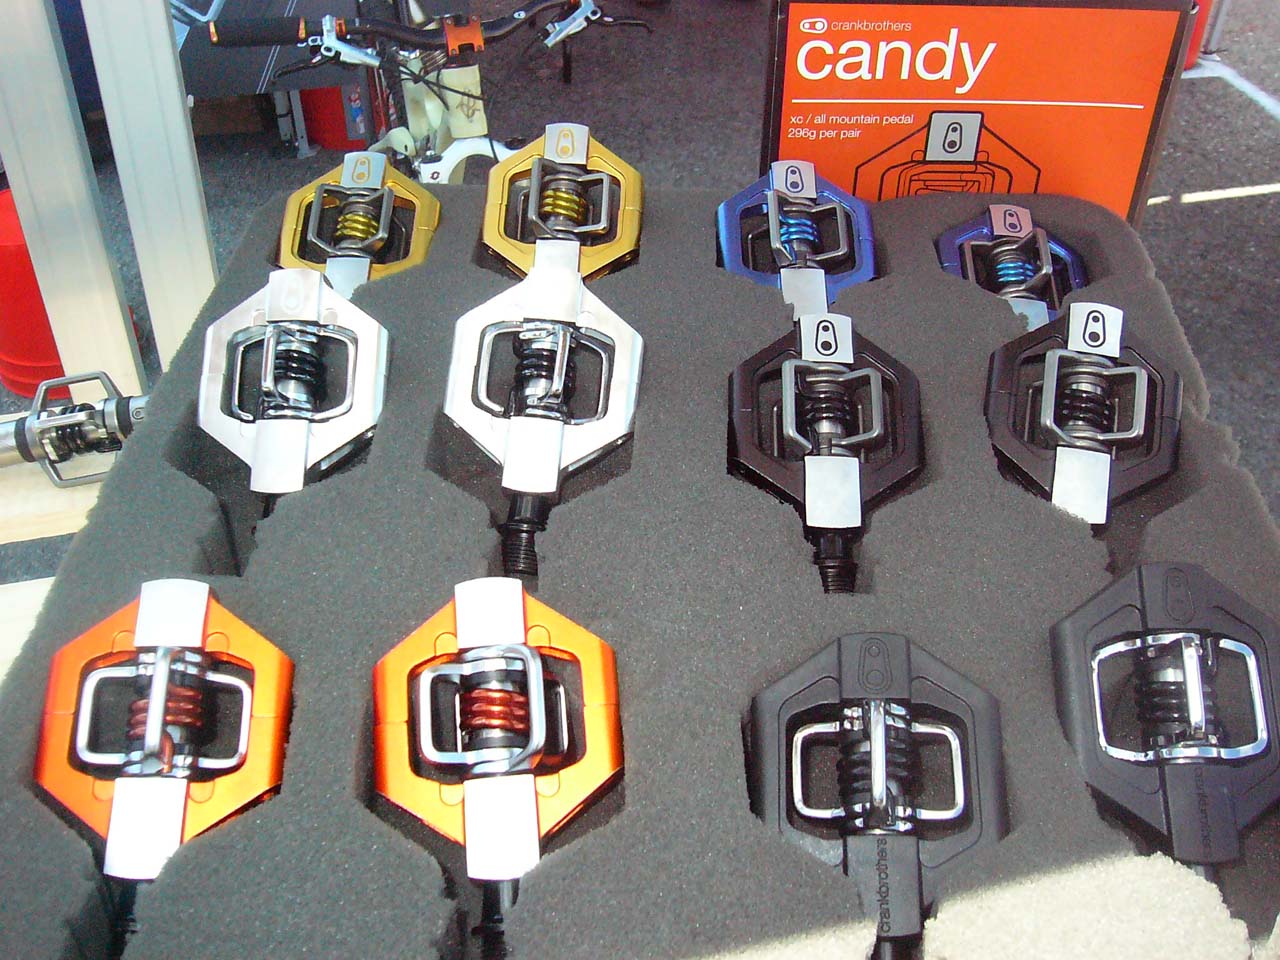 New Crank Bros Candy pedals, with improved bearing design © Ryan Hamilton